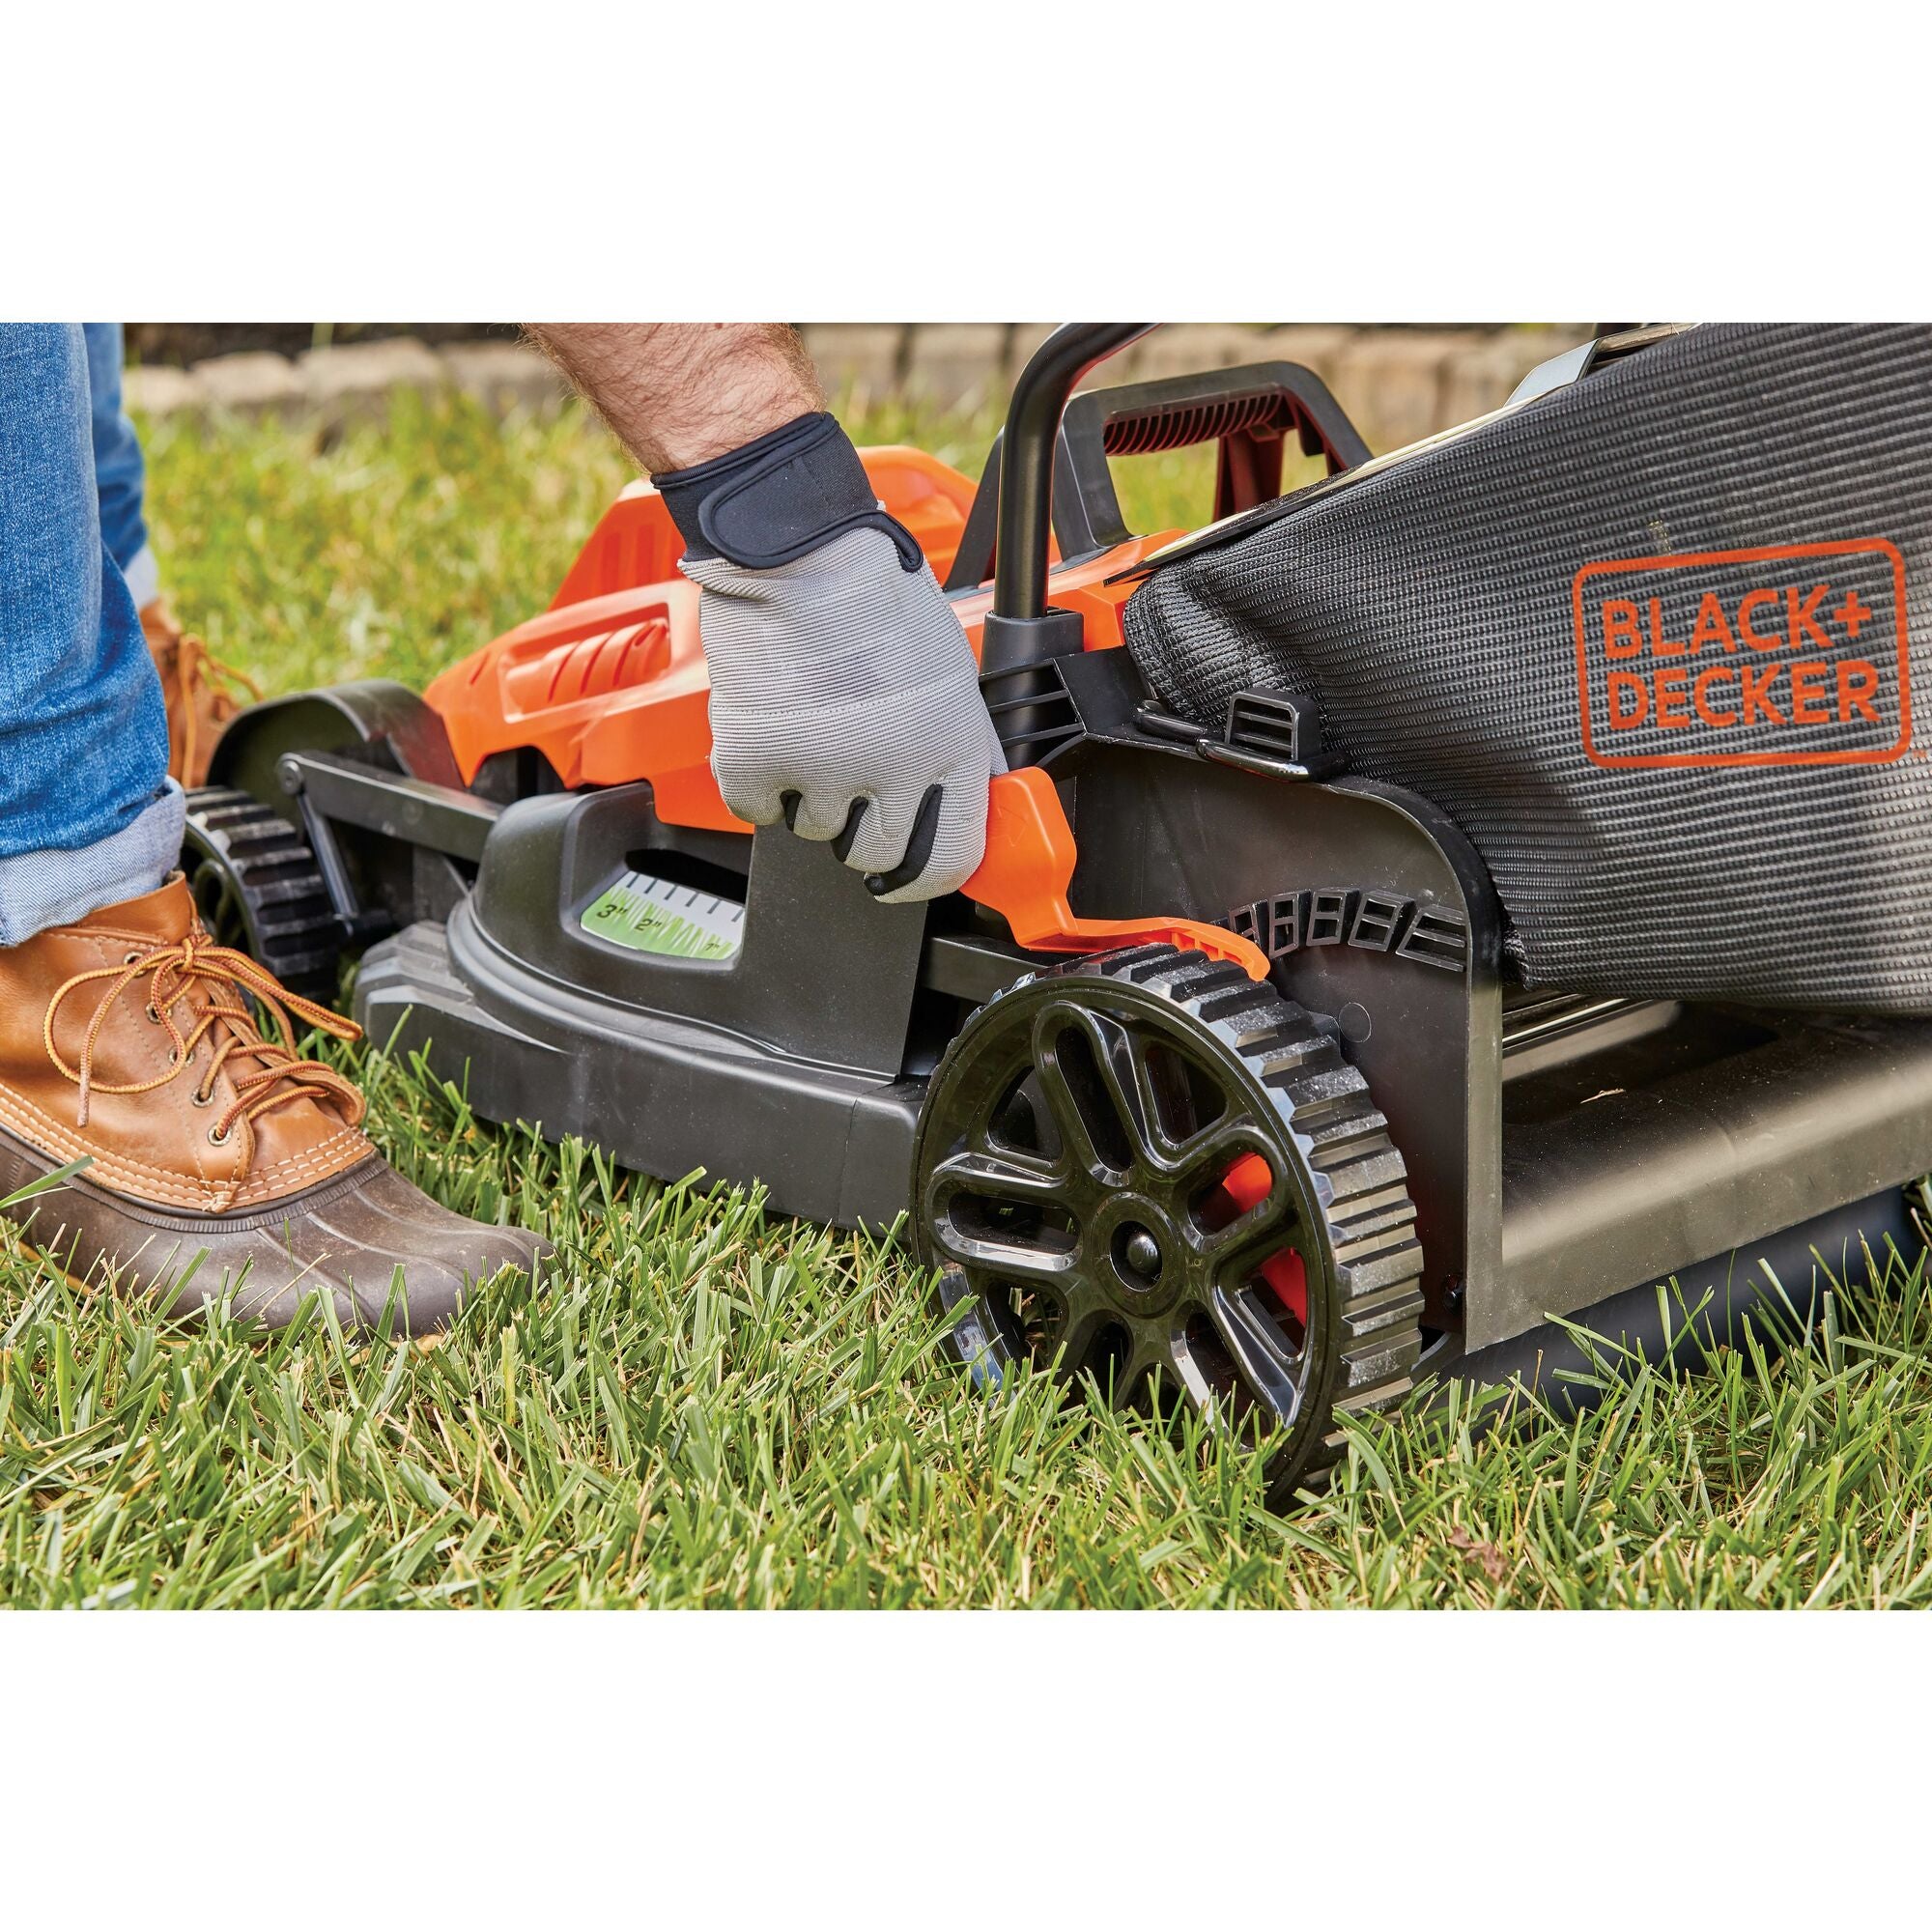 Black & Decker Corded Electric Lawn Mower MM1800 - iFixit